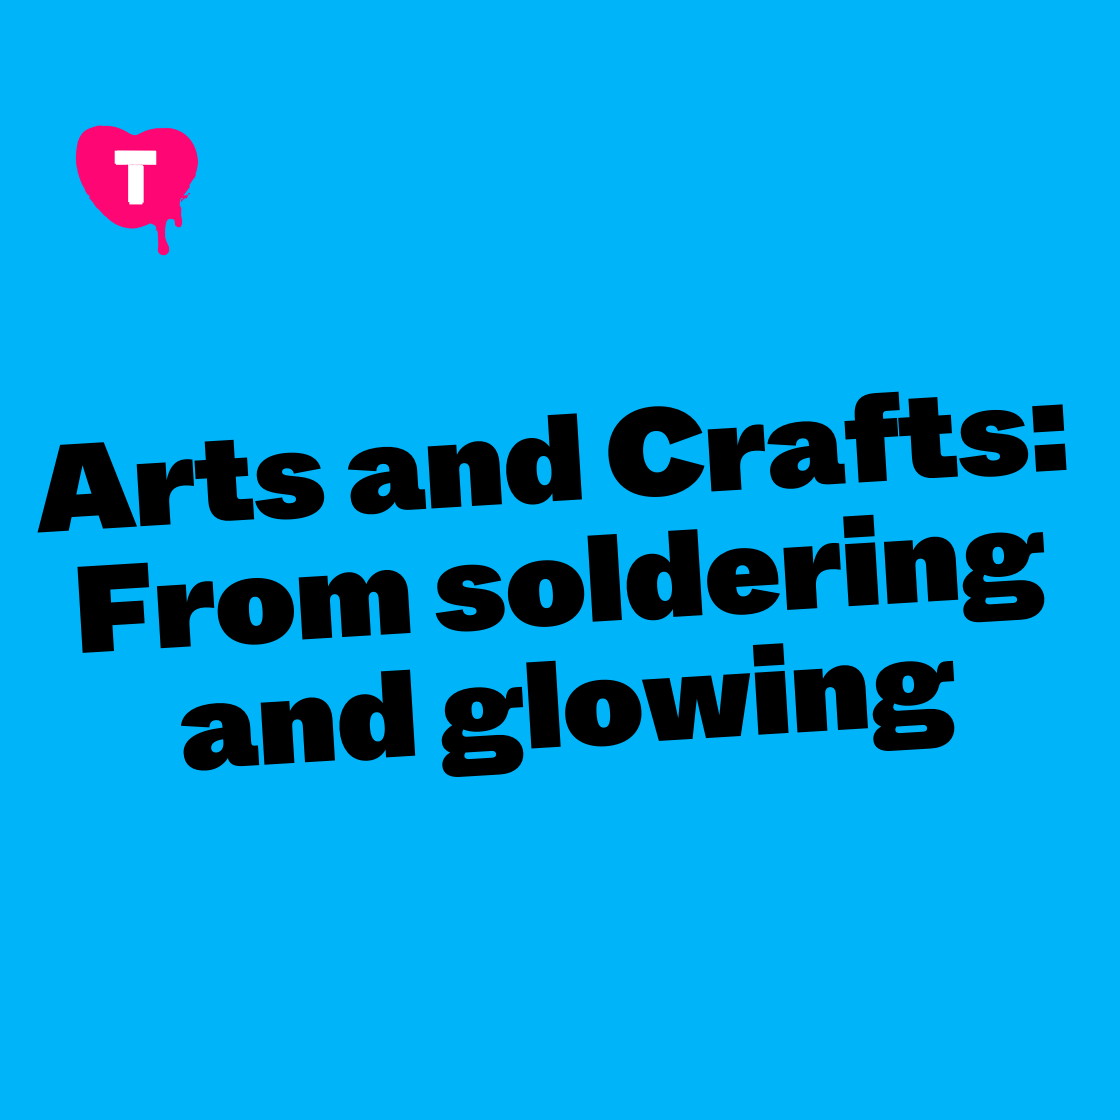 Arts and Crafts: From Soldering an Shining